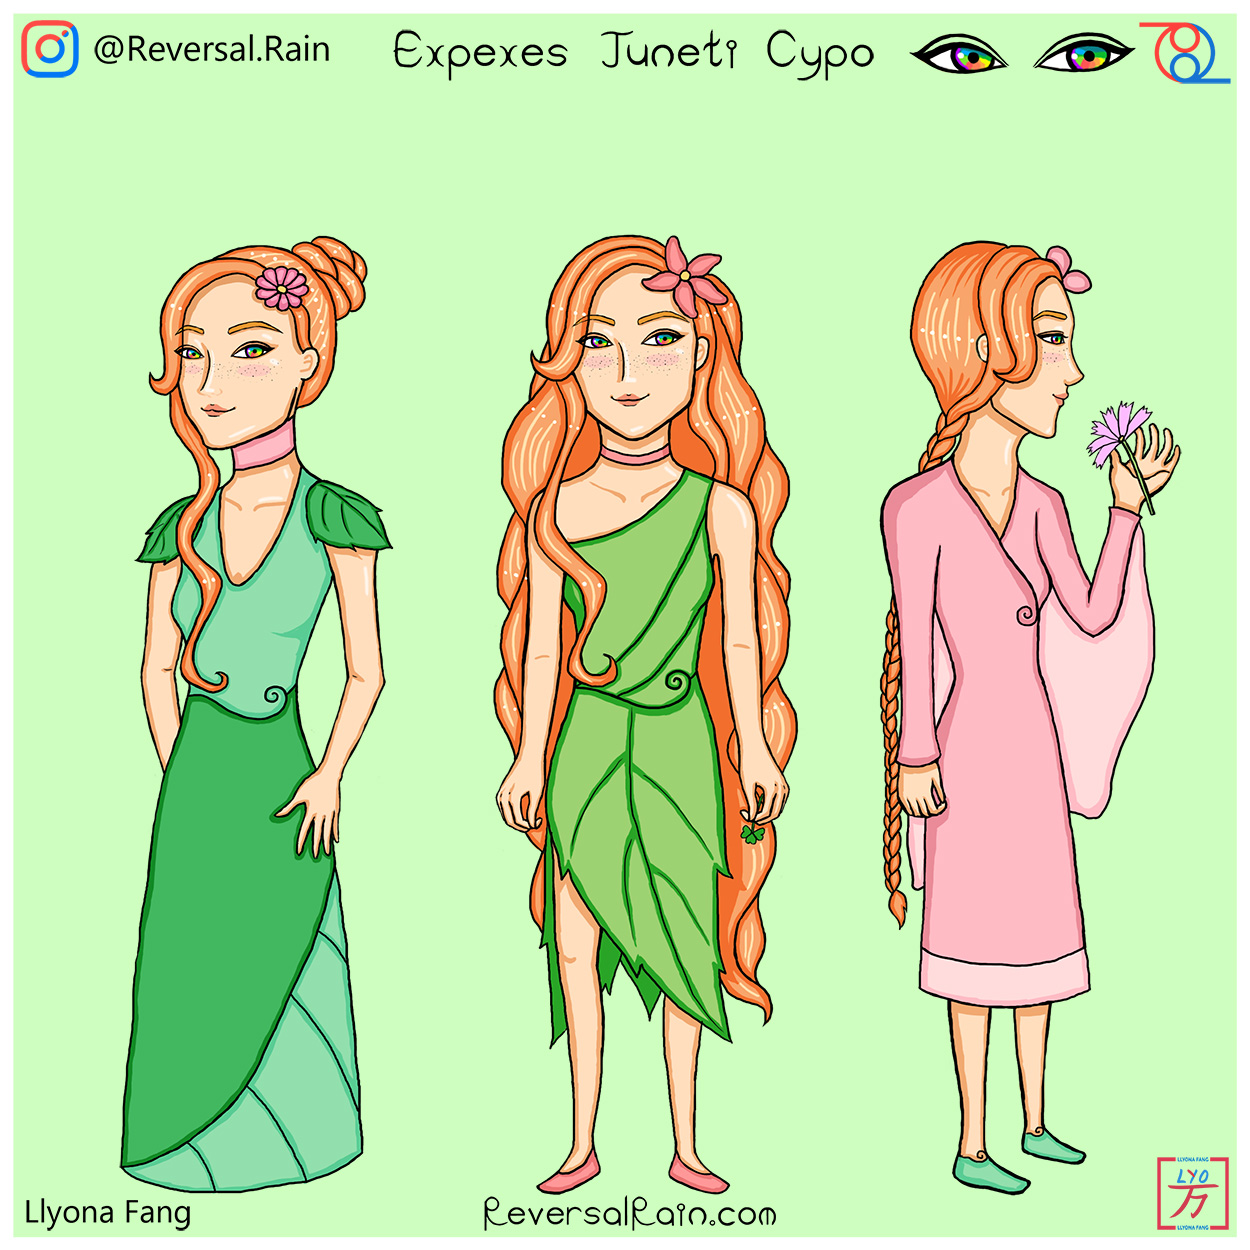 <p><h4>💚🌸 Expexes Juneti Cypo 🌸💚</h4></p>
        <p>A dancer, musician, and fashion designer!</p>
        <p>🎶 Instrument: Harp</p>
          <p>The daughter of the chief council advisor and instrument craftsman hopes to live up to the expectations of her political and
            operatic mother, as her namesake suggests. A natural beauty trained in the classical arts, she captivated attention and made a
            name for herself as the village theater's harpist. Of course, she'd prefer to be known by her more straightforward middle name.
            You might find her tending to her home-grown garden, gracefully frolicking along the liana vines, or adorning the gentle pluck
            of her harp strings with a nourishing soprano voice. Fully supported by her parents, she creates brilliant nature-inspired
            fashion designs, hoping to start a new industry for trade with the ark dwellers. However, this apparent aura of success does
            seem to make her feel entitled to bending rules.<p><p>
            <p>» <i>Click to exit description!</i> «</p></p>
          